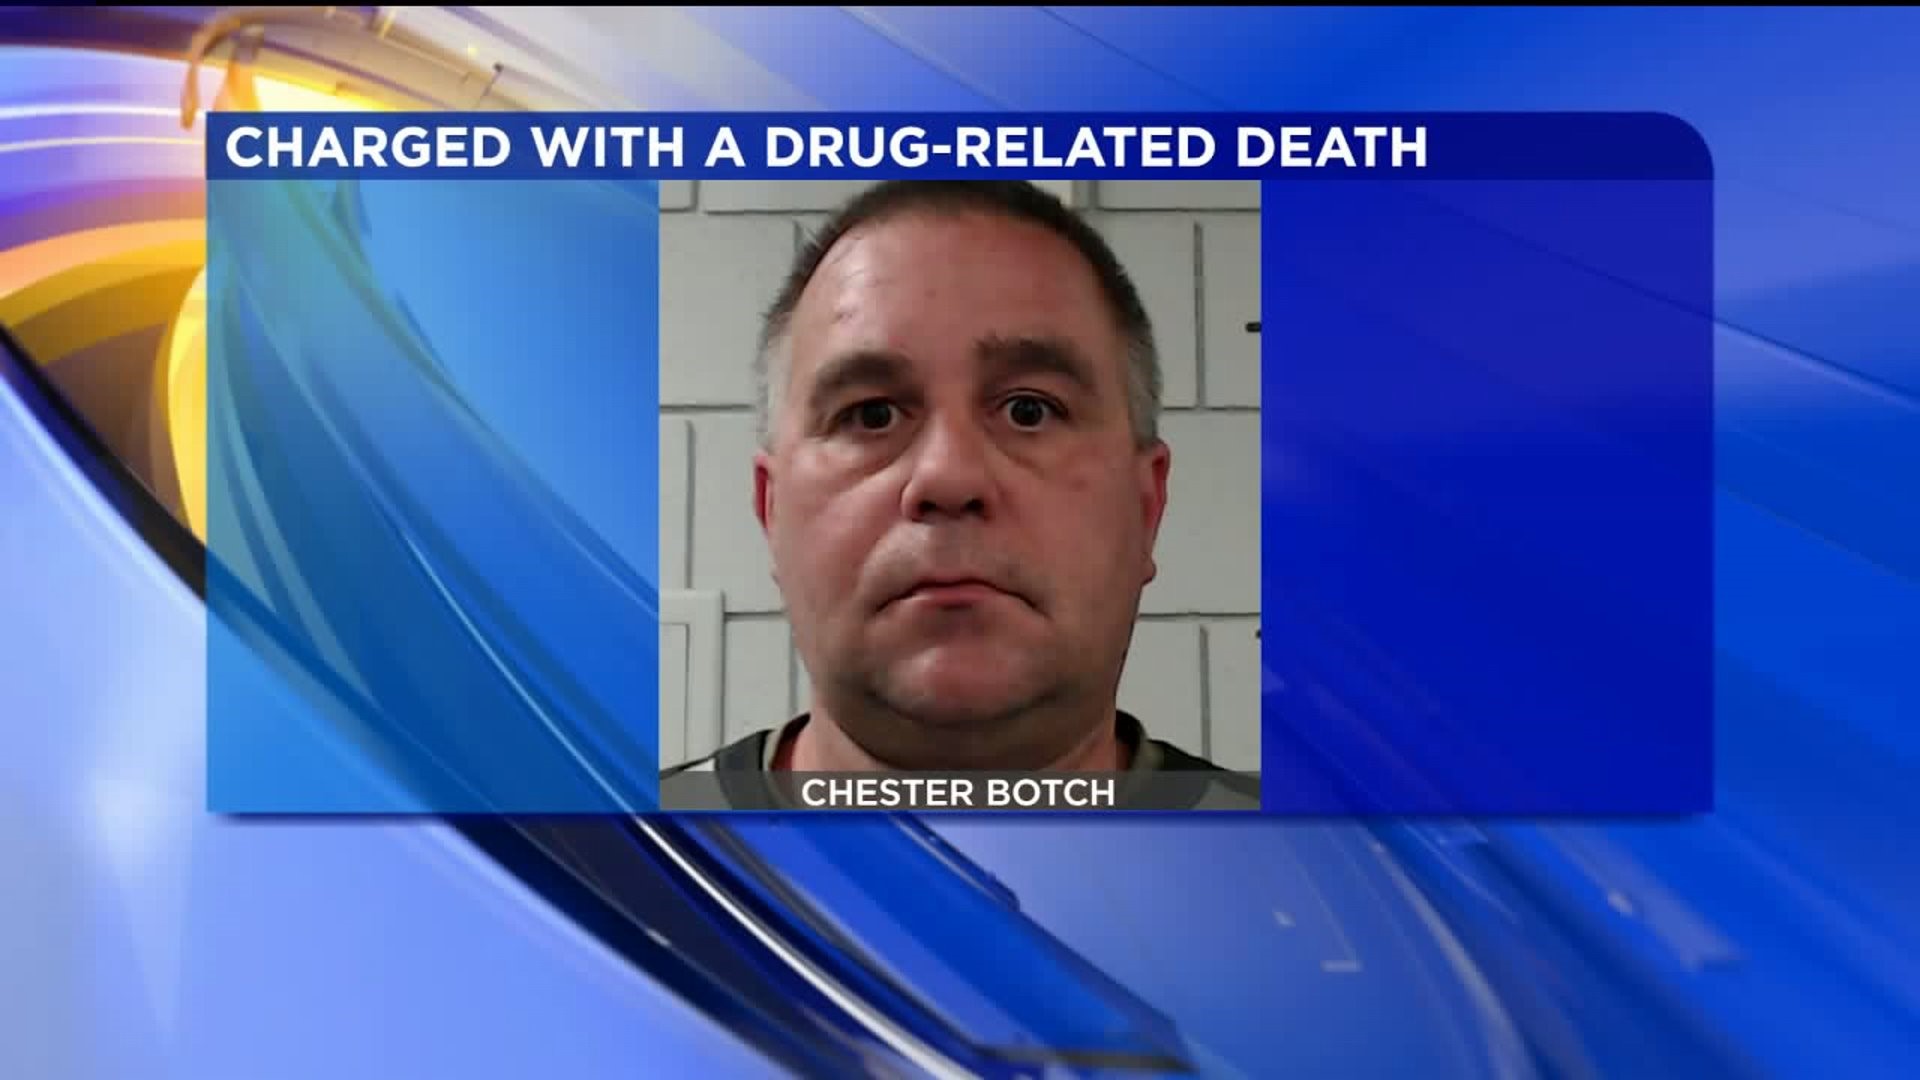 Monroe County Man Facing Drug-related Death Charges